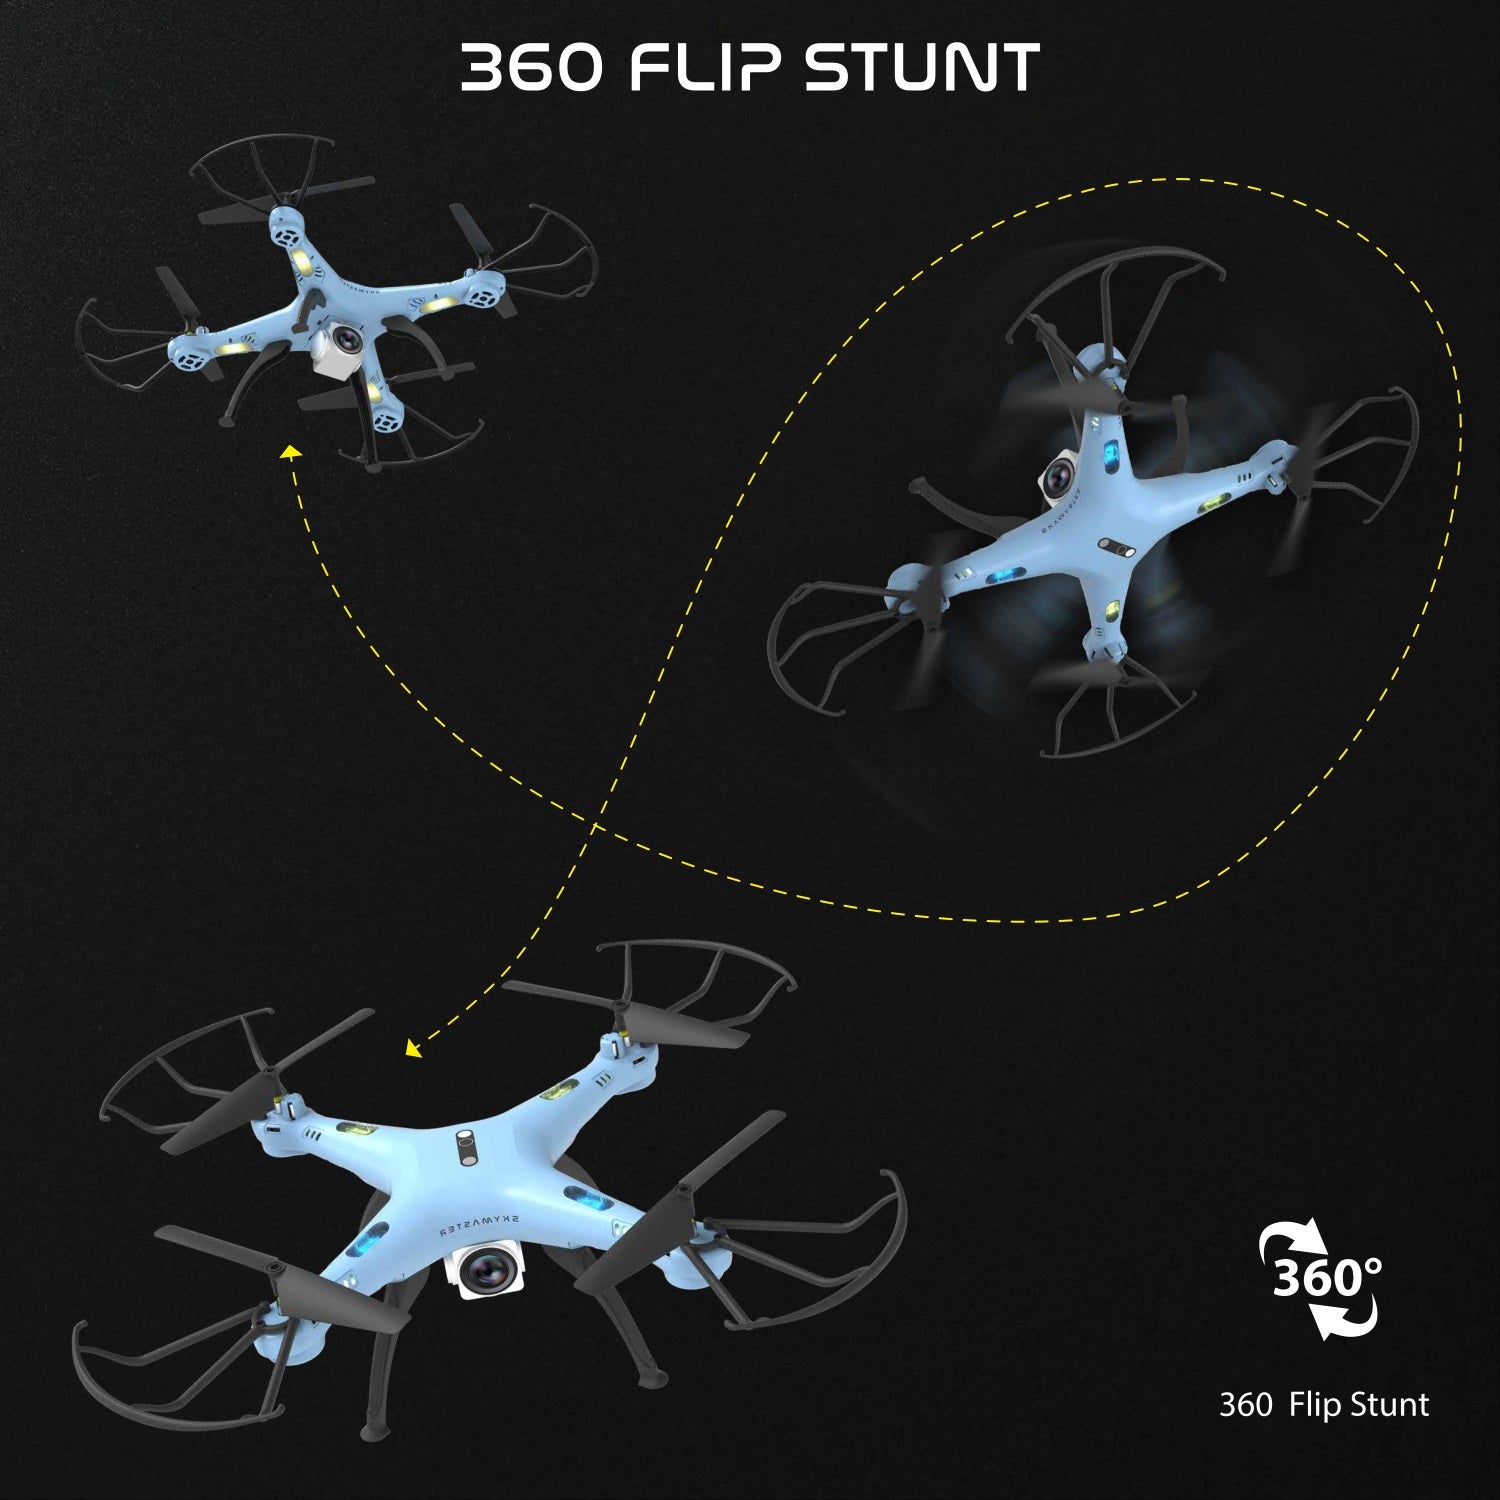 3D Flip and stunts. Easy to use. one-key-take-off and one-key-return. One-key-landing